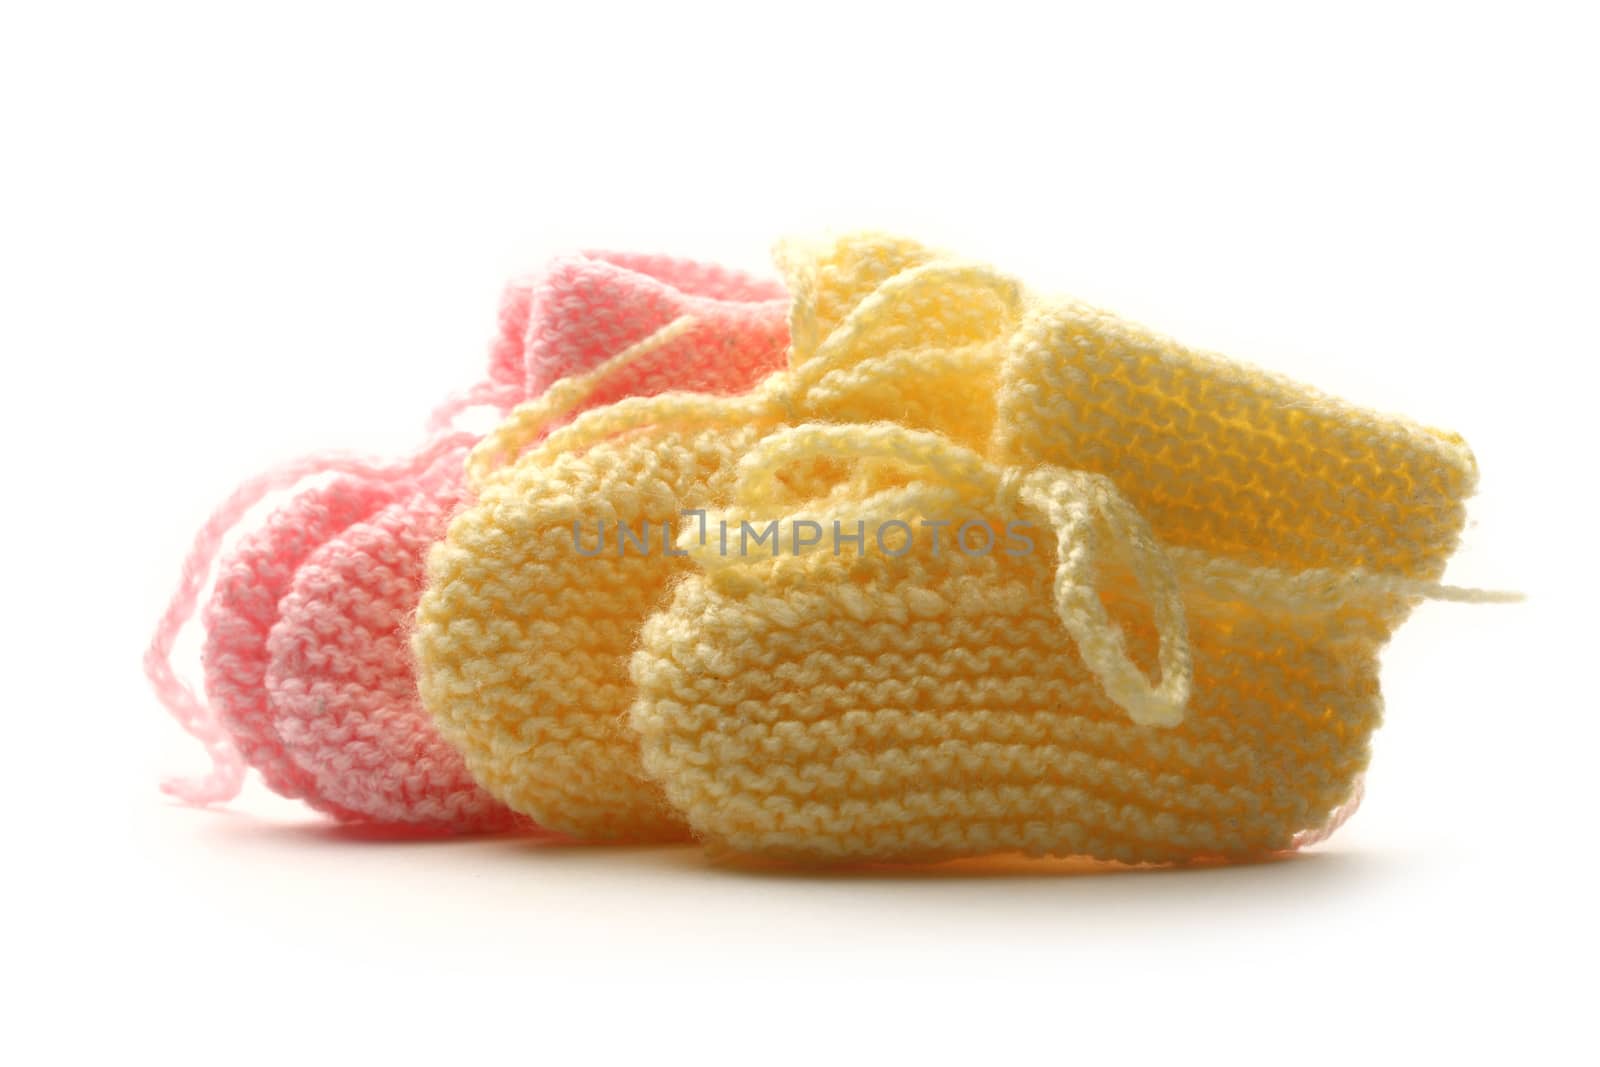 Baby bootees on white background by Garsya